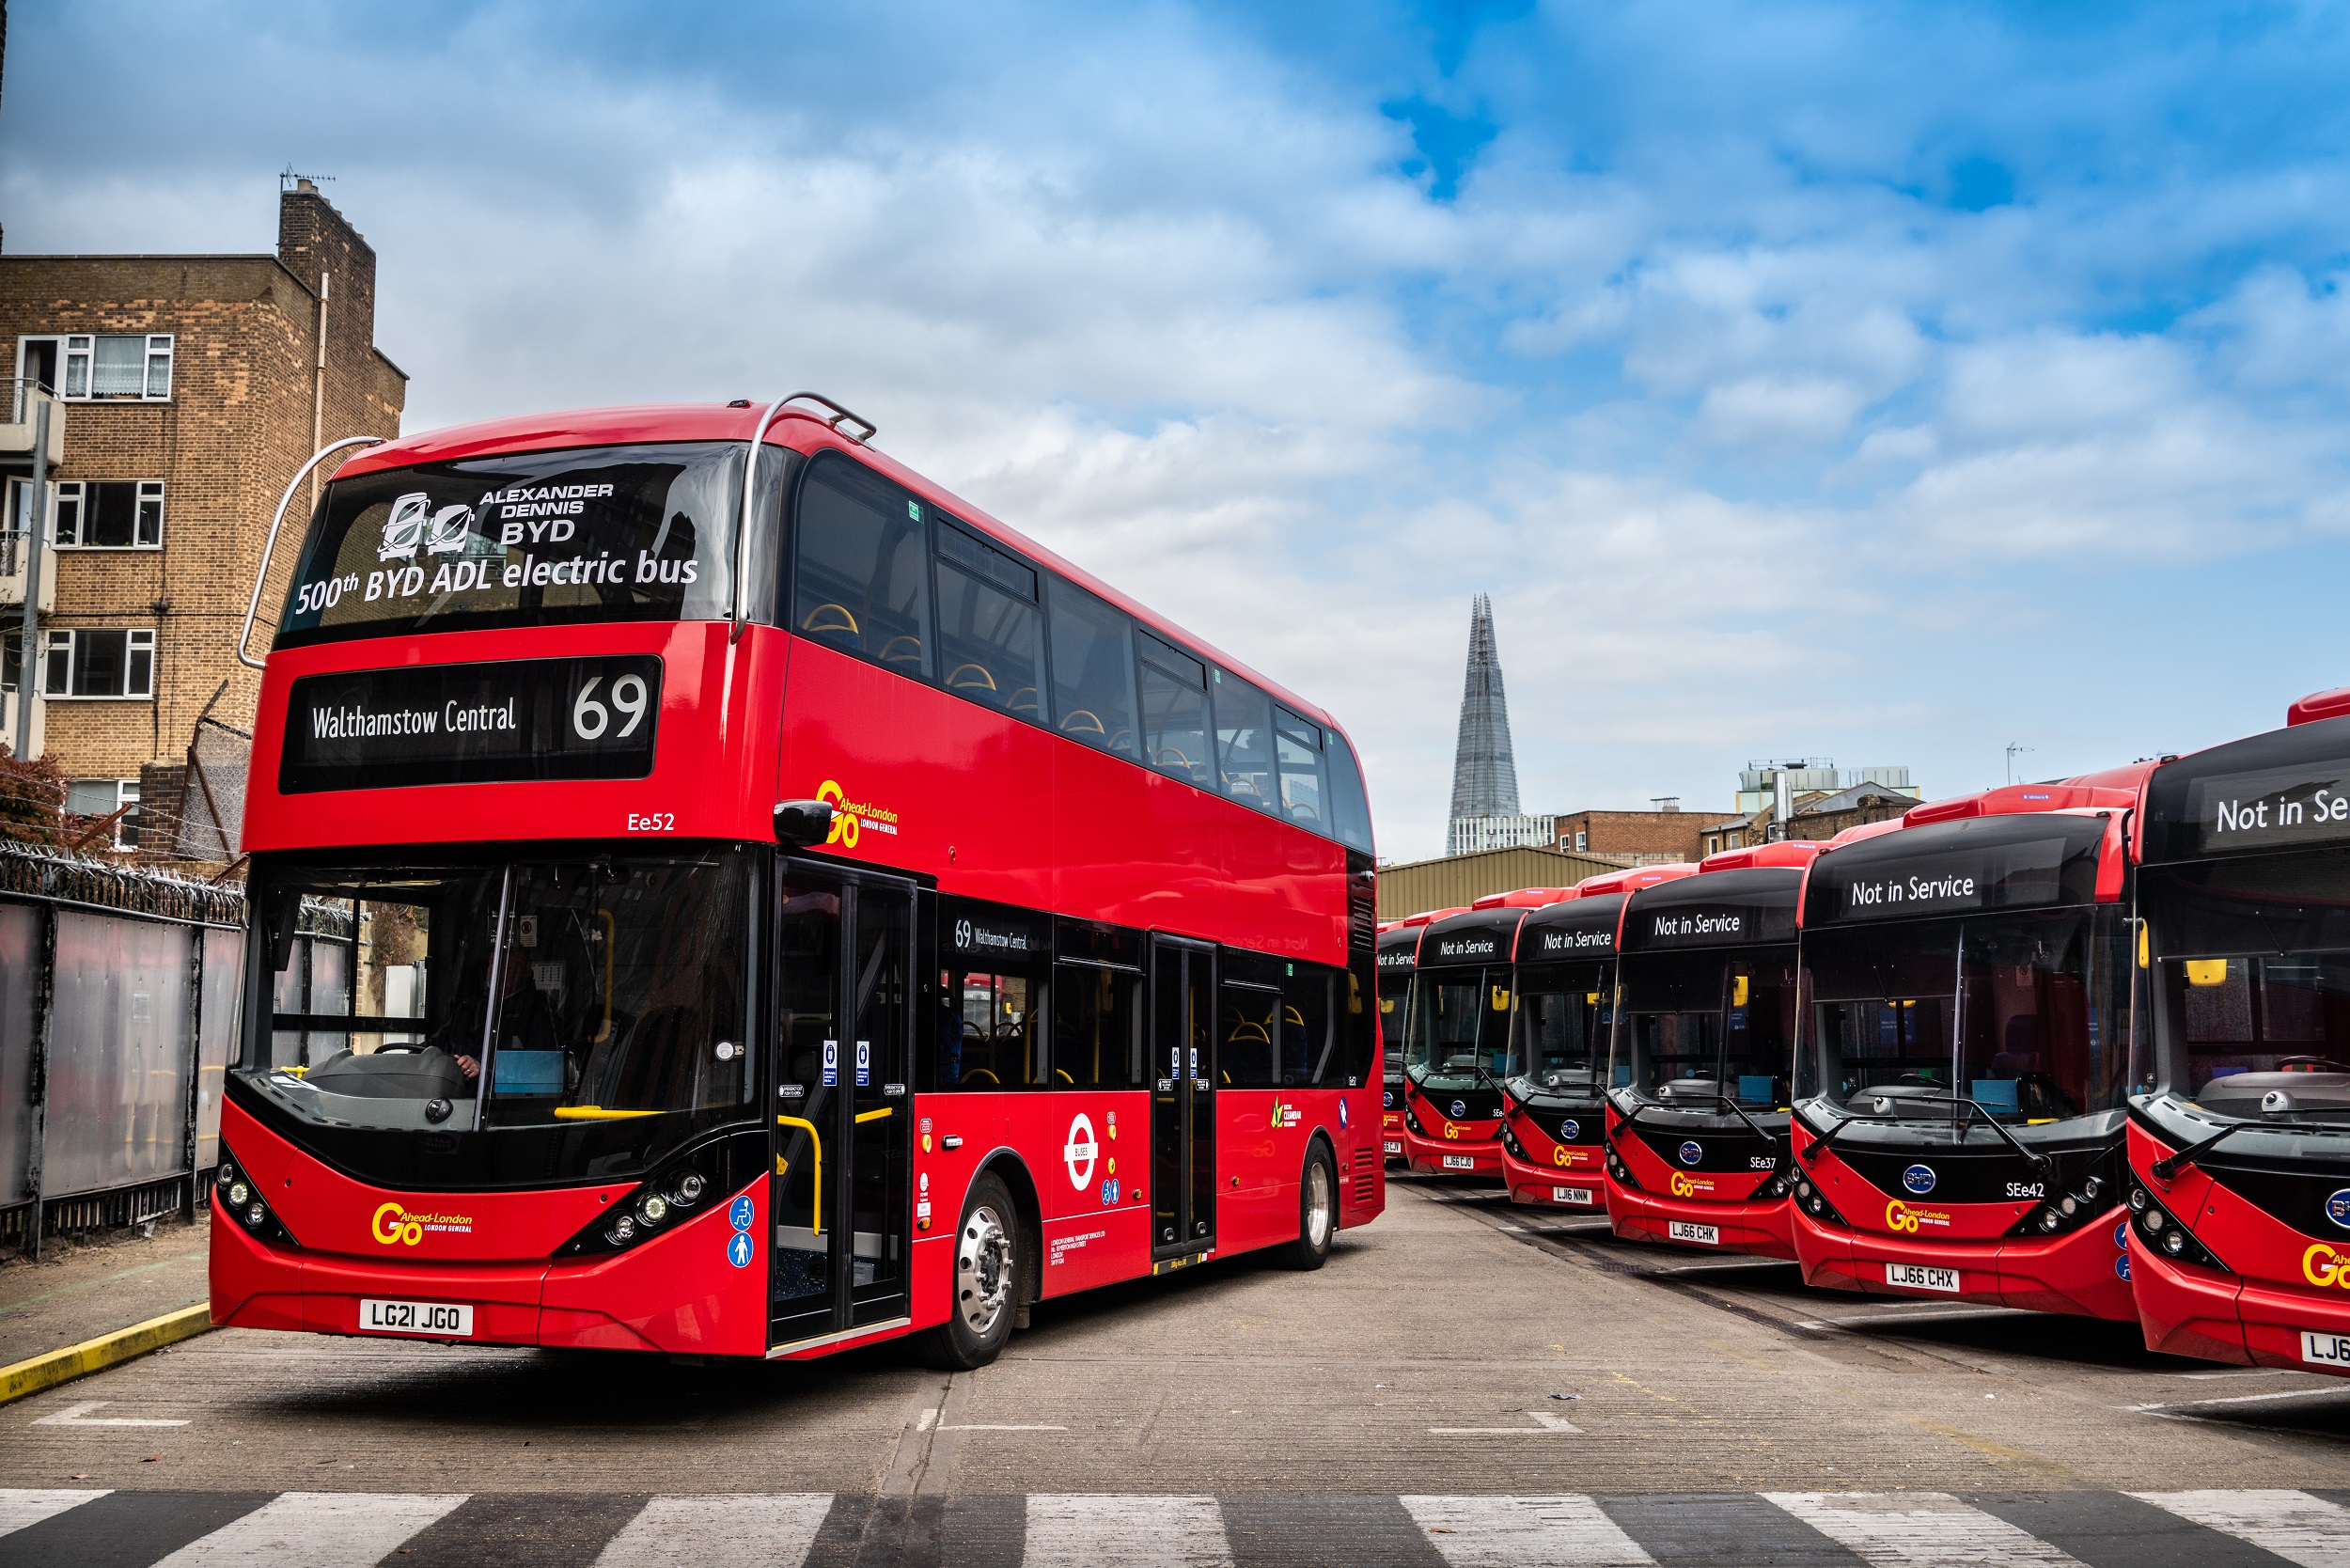 500th BYD ADL electric bus delivered